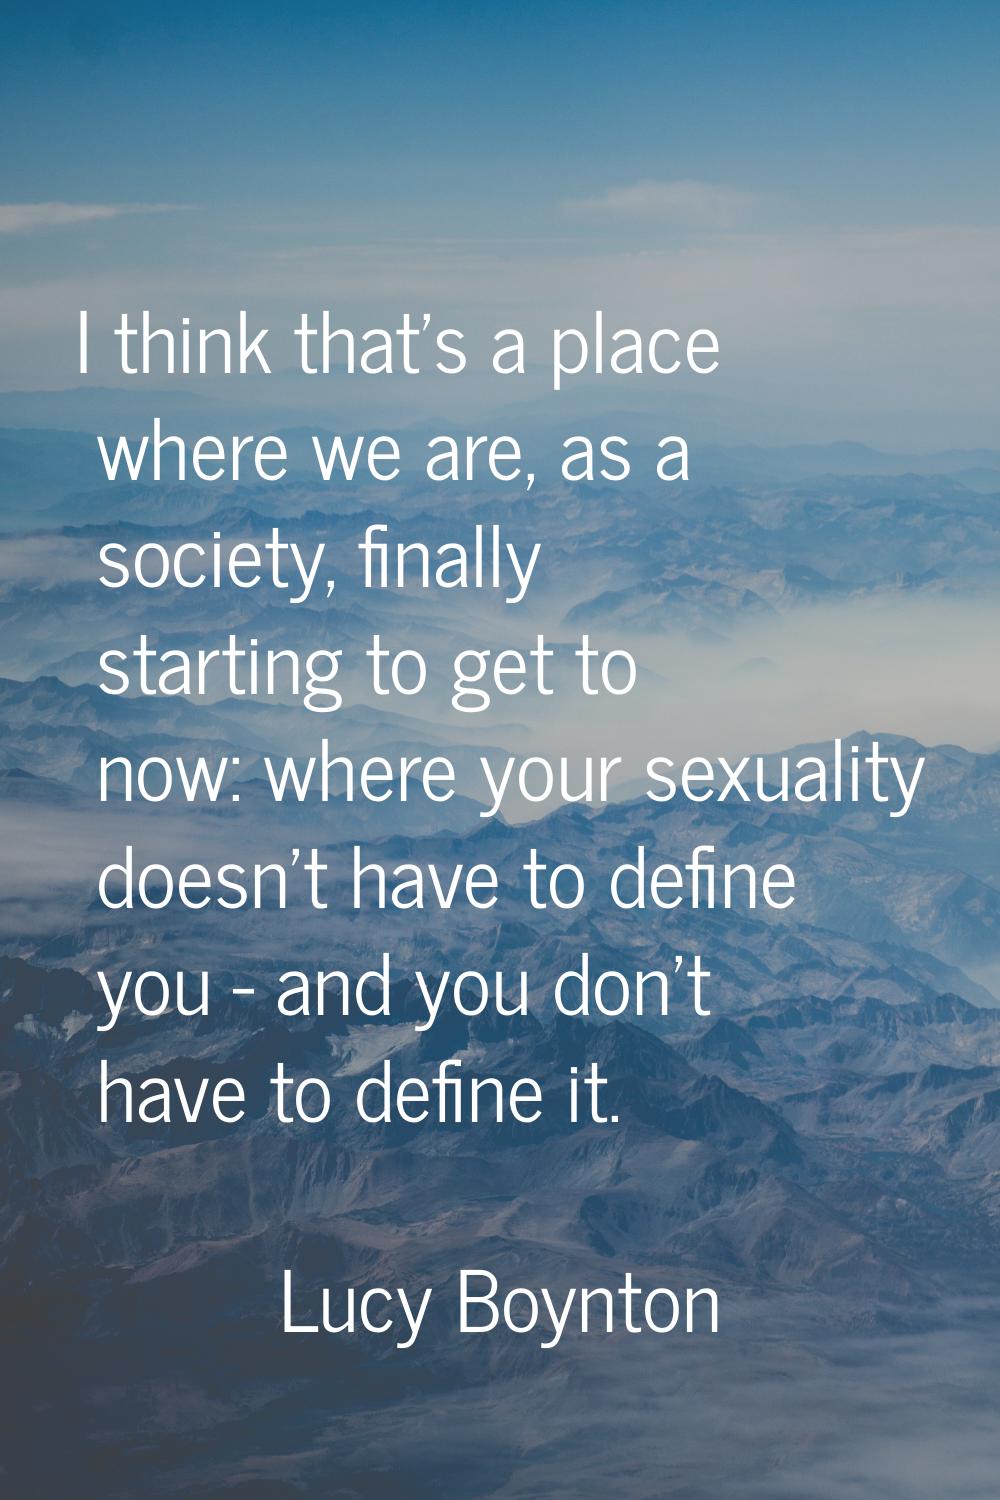 I think that's a place where we are, as a society, finally starting to get to now: where your sexua